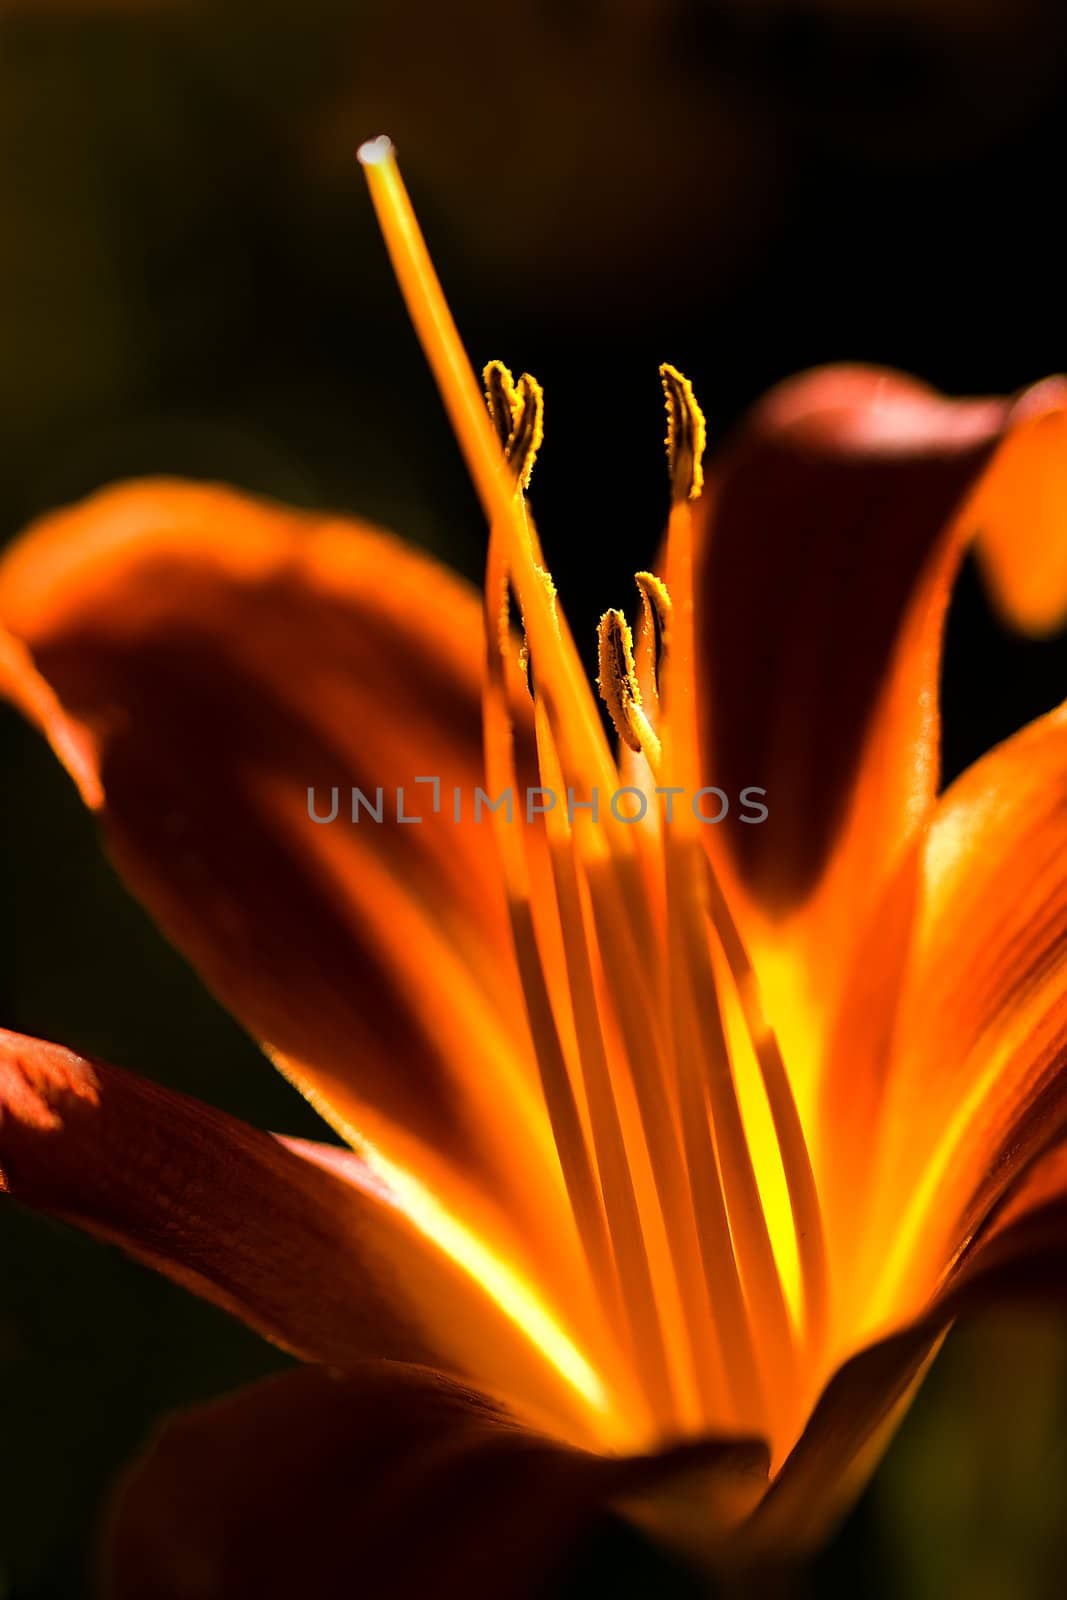 Orange daylily glow in evening sunlight by Colette